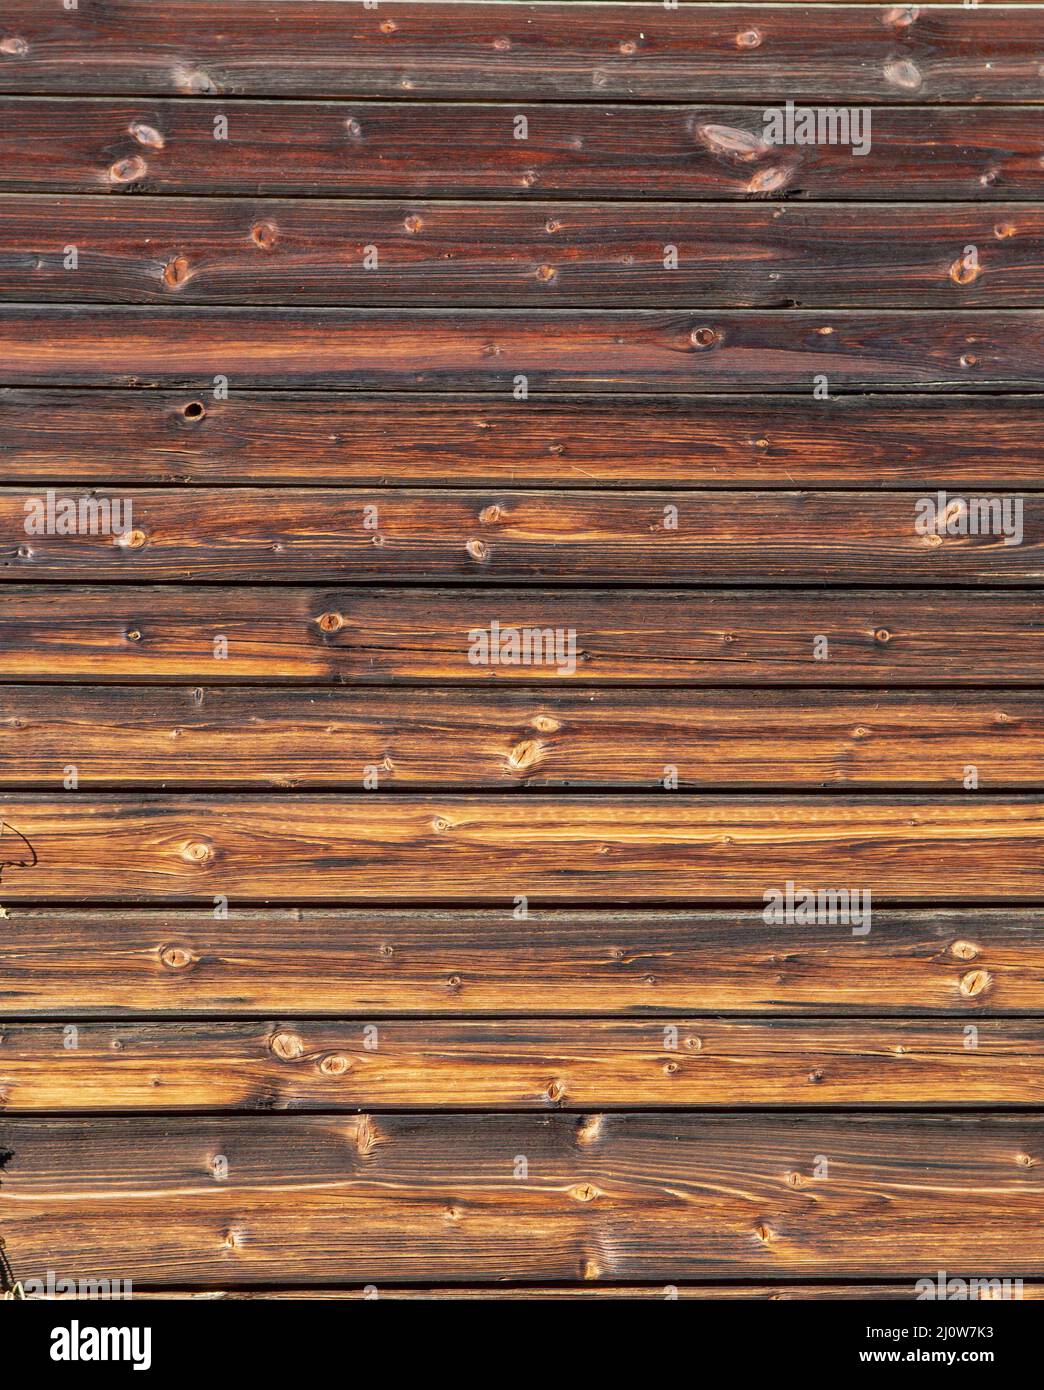 Old wooden boards background. Shabby vintage rustic texture. Aged brown wooden wall. Abstract. Stock Photo